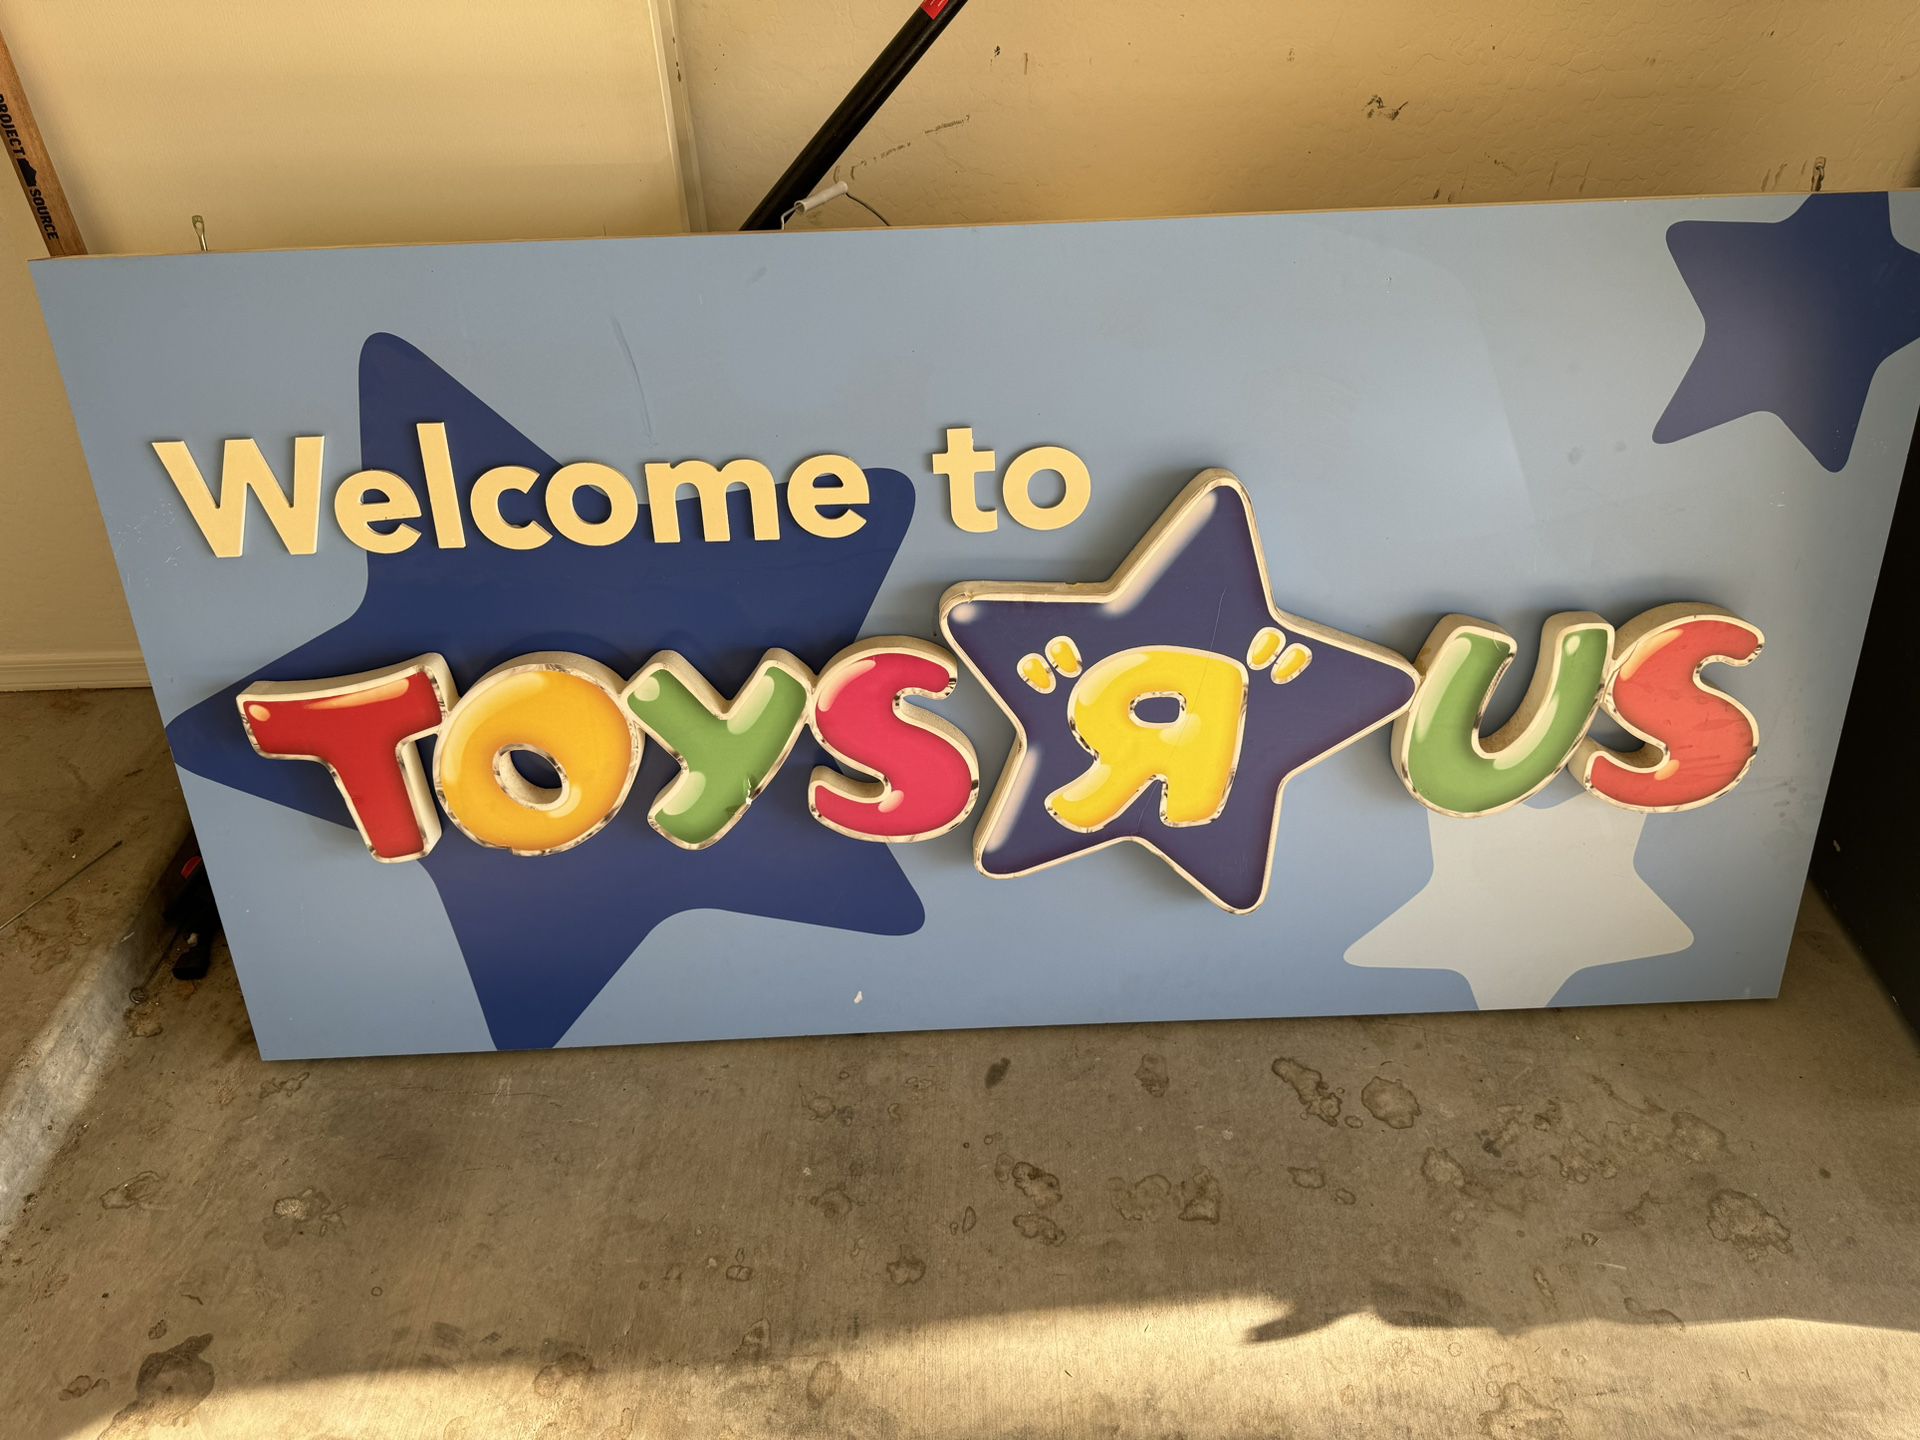 Big TOYS R US double Sided Sign 